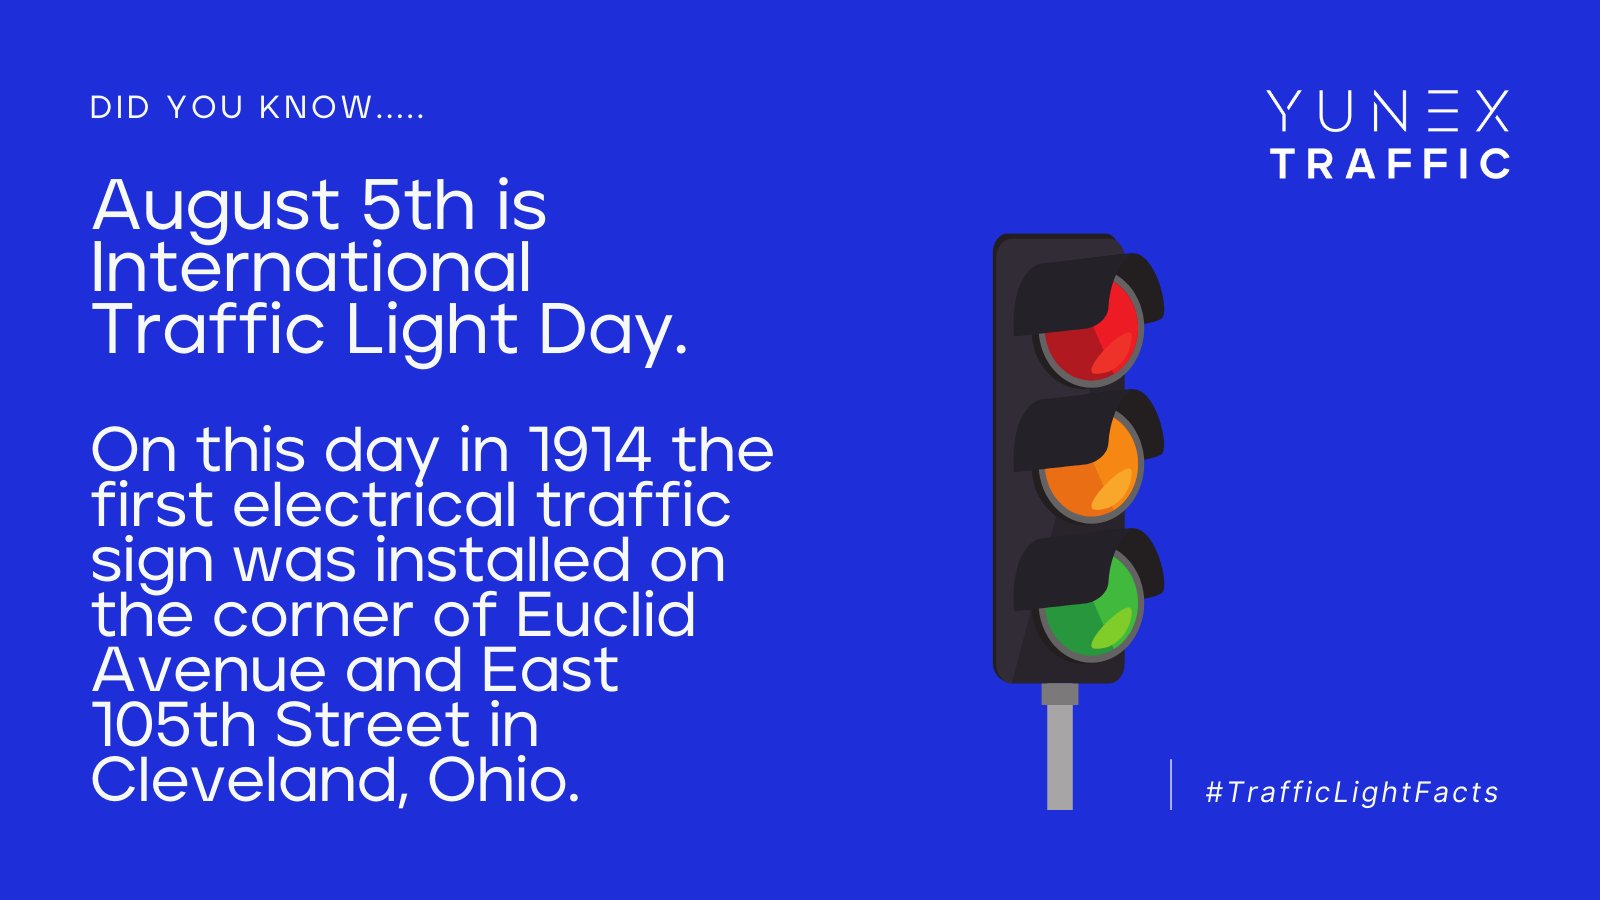 Yunex Traffic on Twitter: "You want Facts about Traffic Lights? We have them. Happy International Traffic Light Day! Wishing you many green lights. 🚦 ❤️ #TeamYunexTraffic #TrafficLightDay #TrafficLightFacts https://t.co/FXs5uYhIeg" / Twitter